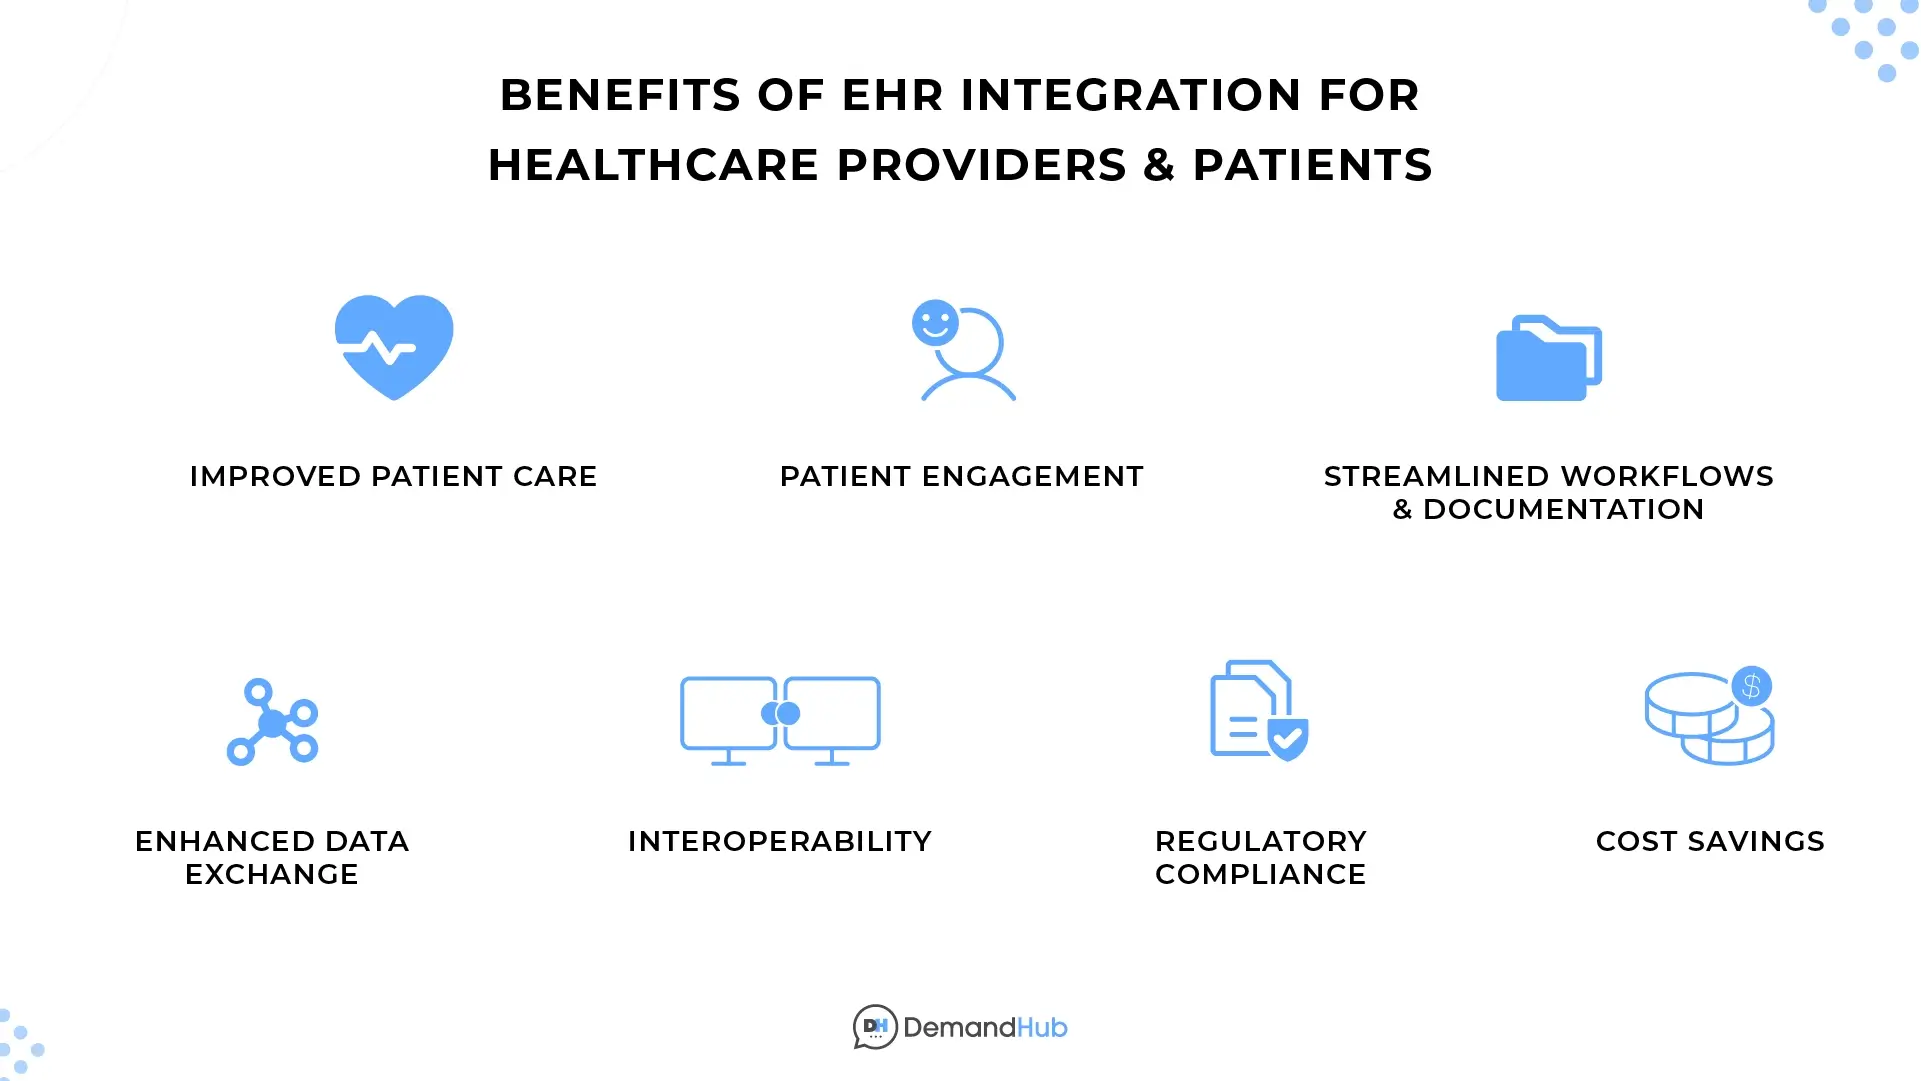 Benefits of EHR Integration for Healthcare Providers and Patients